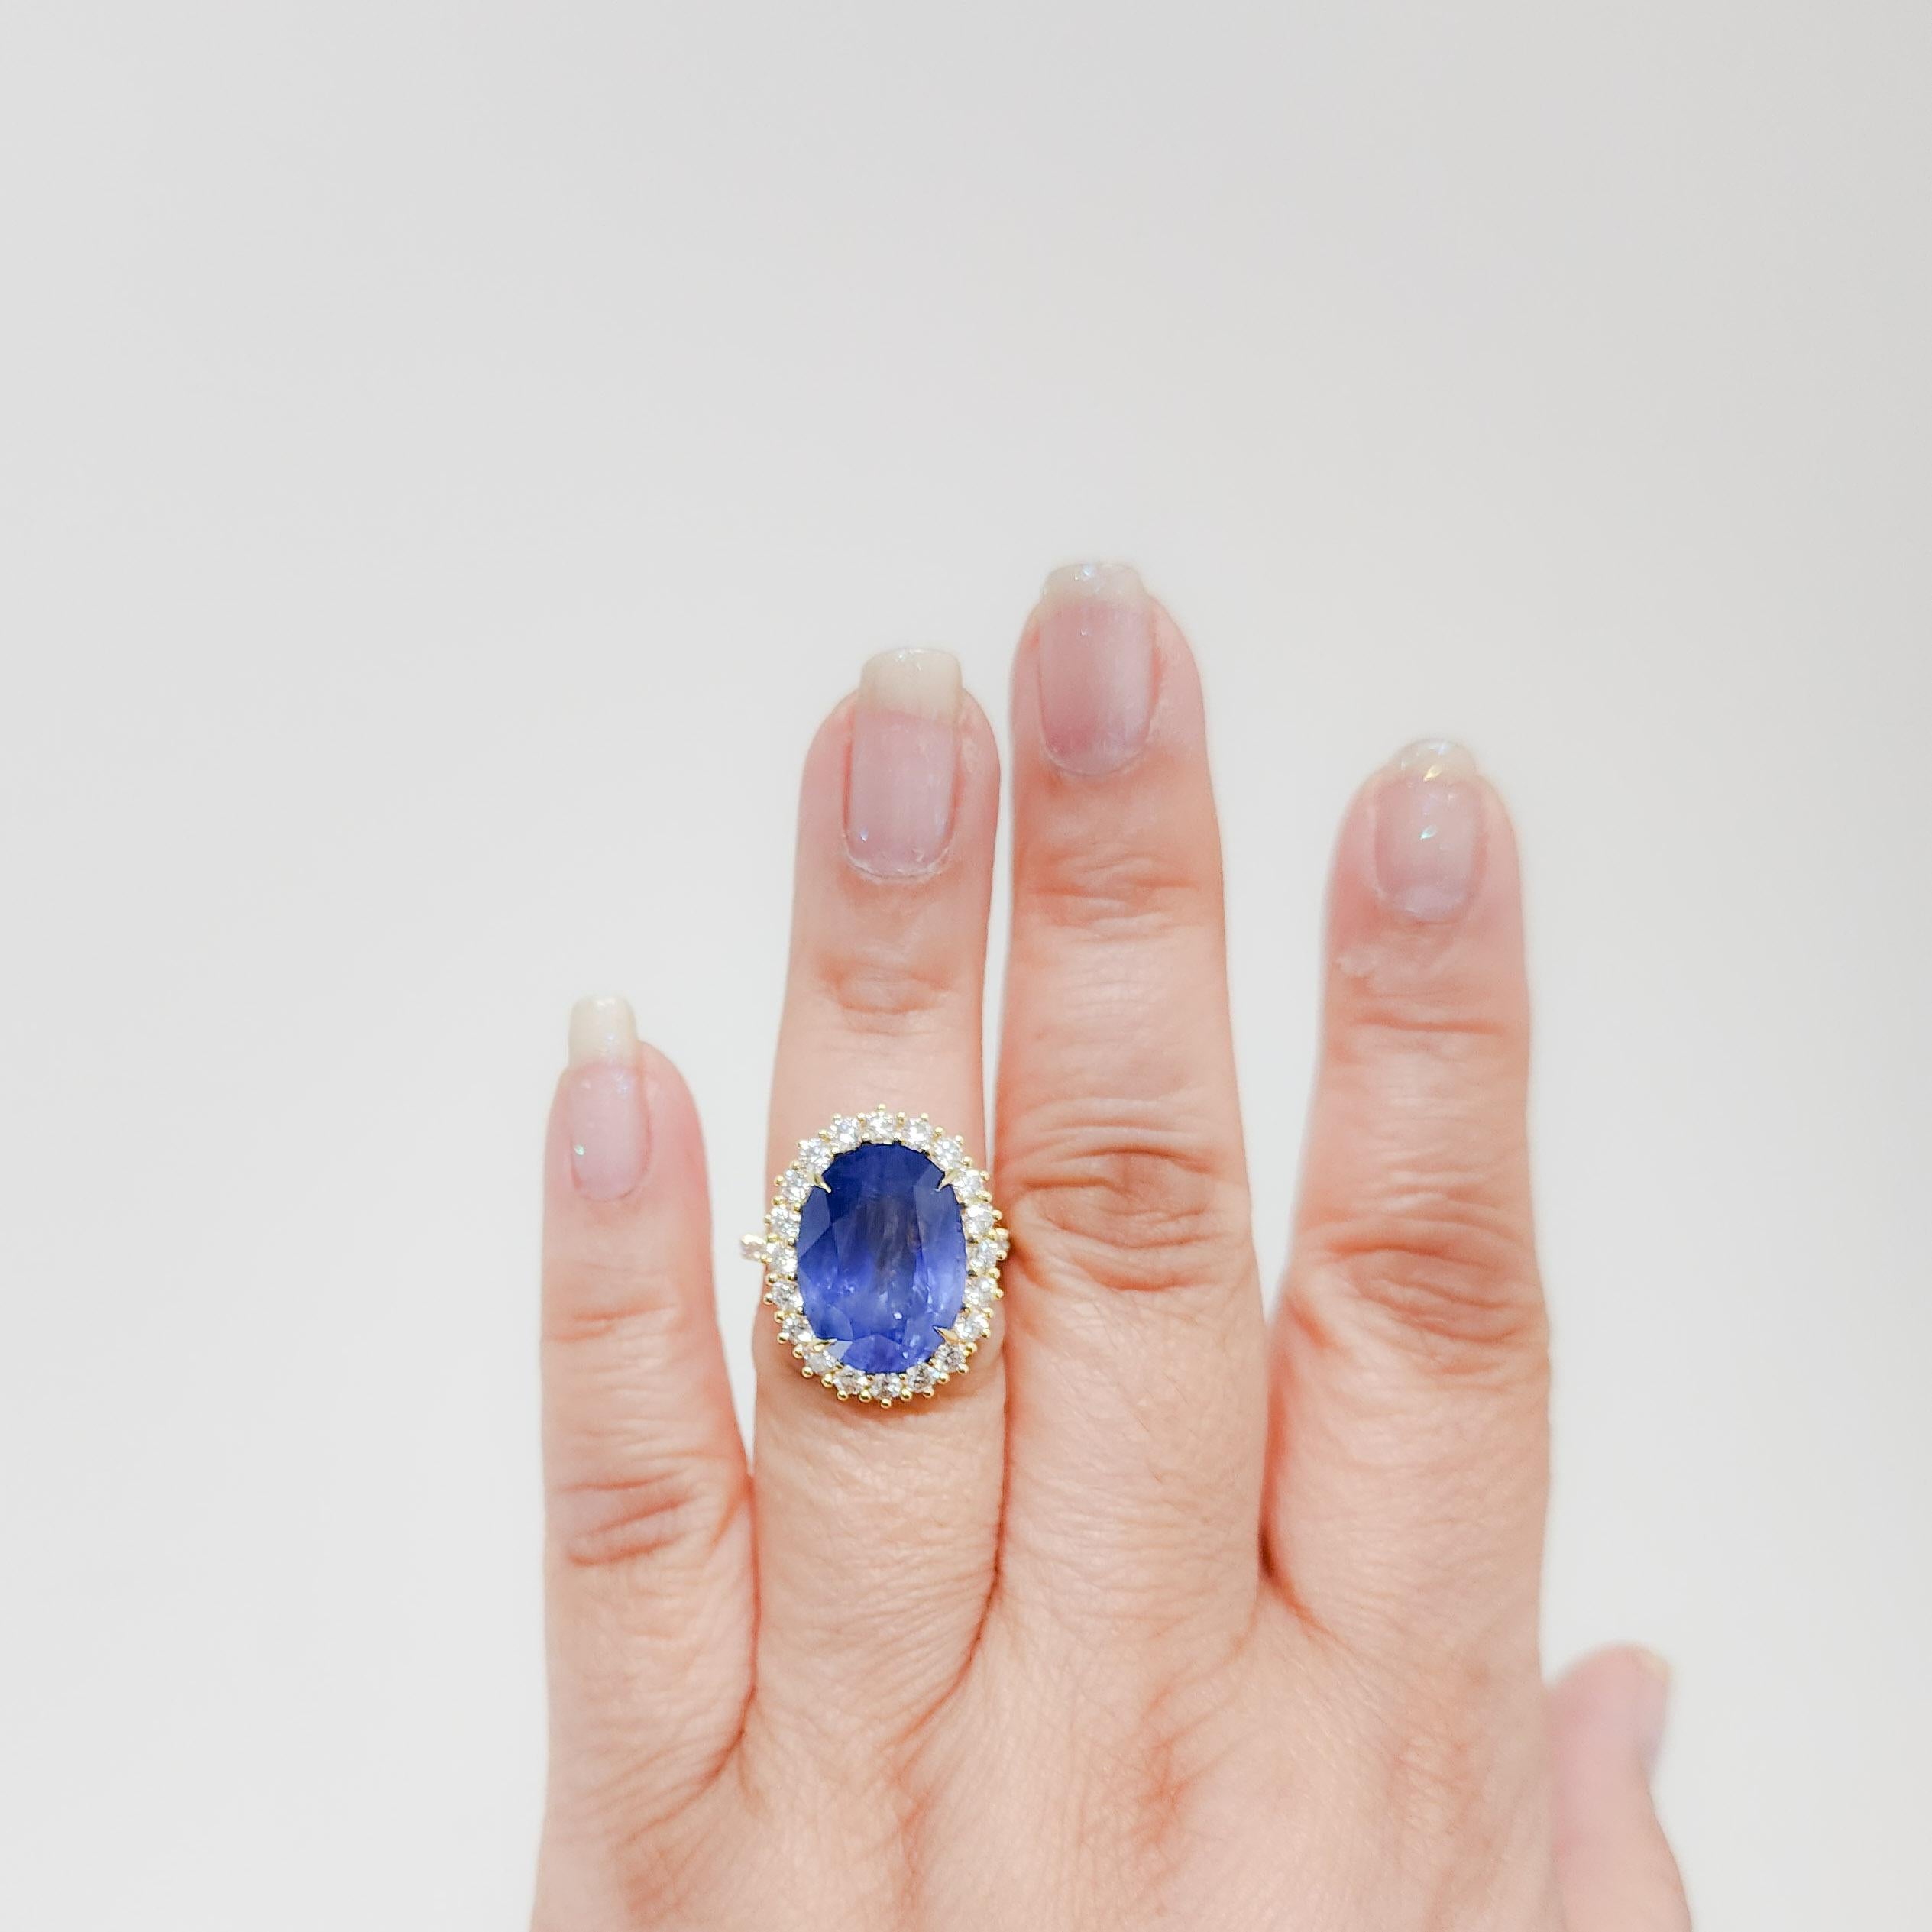 Gorgeous 17.23 ct. unheated Burma blue sapphire oval with 1.29 ct. of good quality, white, and bright diamond rounds.  Handmade in 18k yellow gold.  Ring size 6.5.  GIA certificate included.